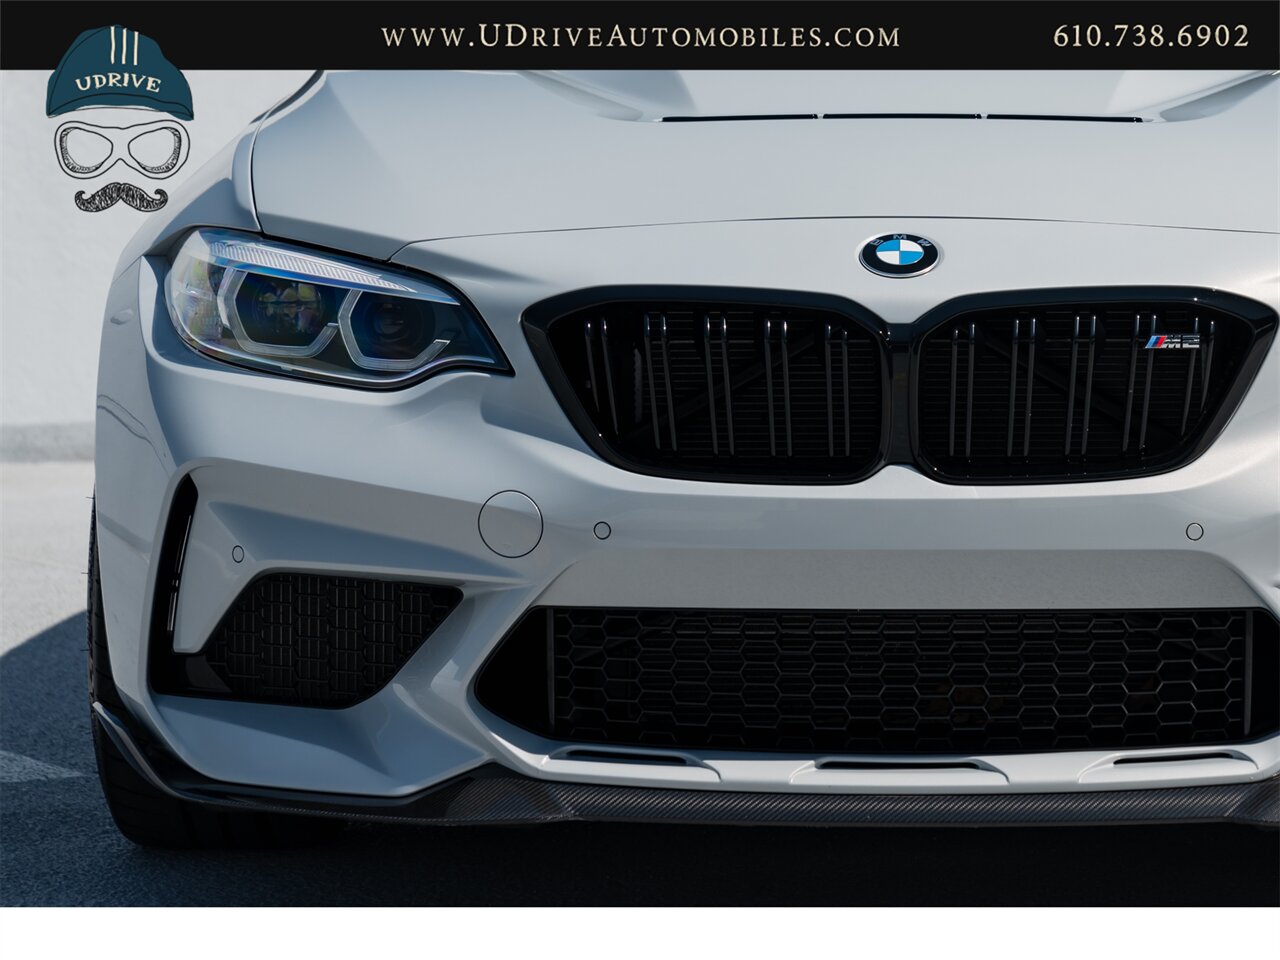 2020 BMW M2 CS  M2 CS 6 Speed Manual 2k Miles Full Body PPF Factory Warranty until 2025 - Photo 13 - West Chester, PA 19382